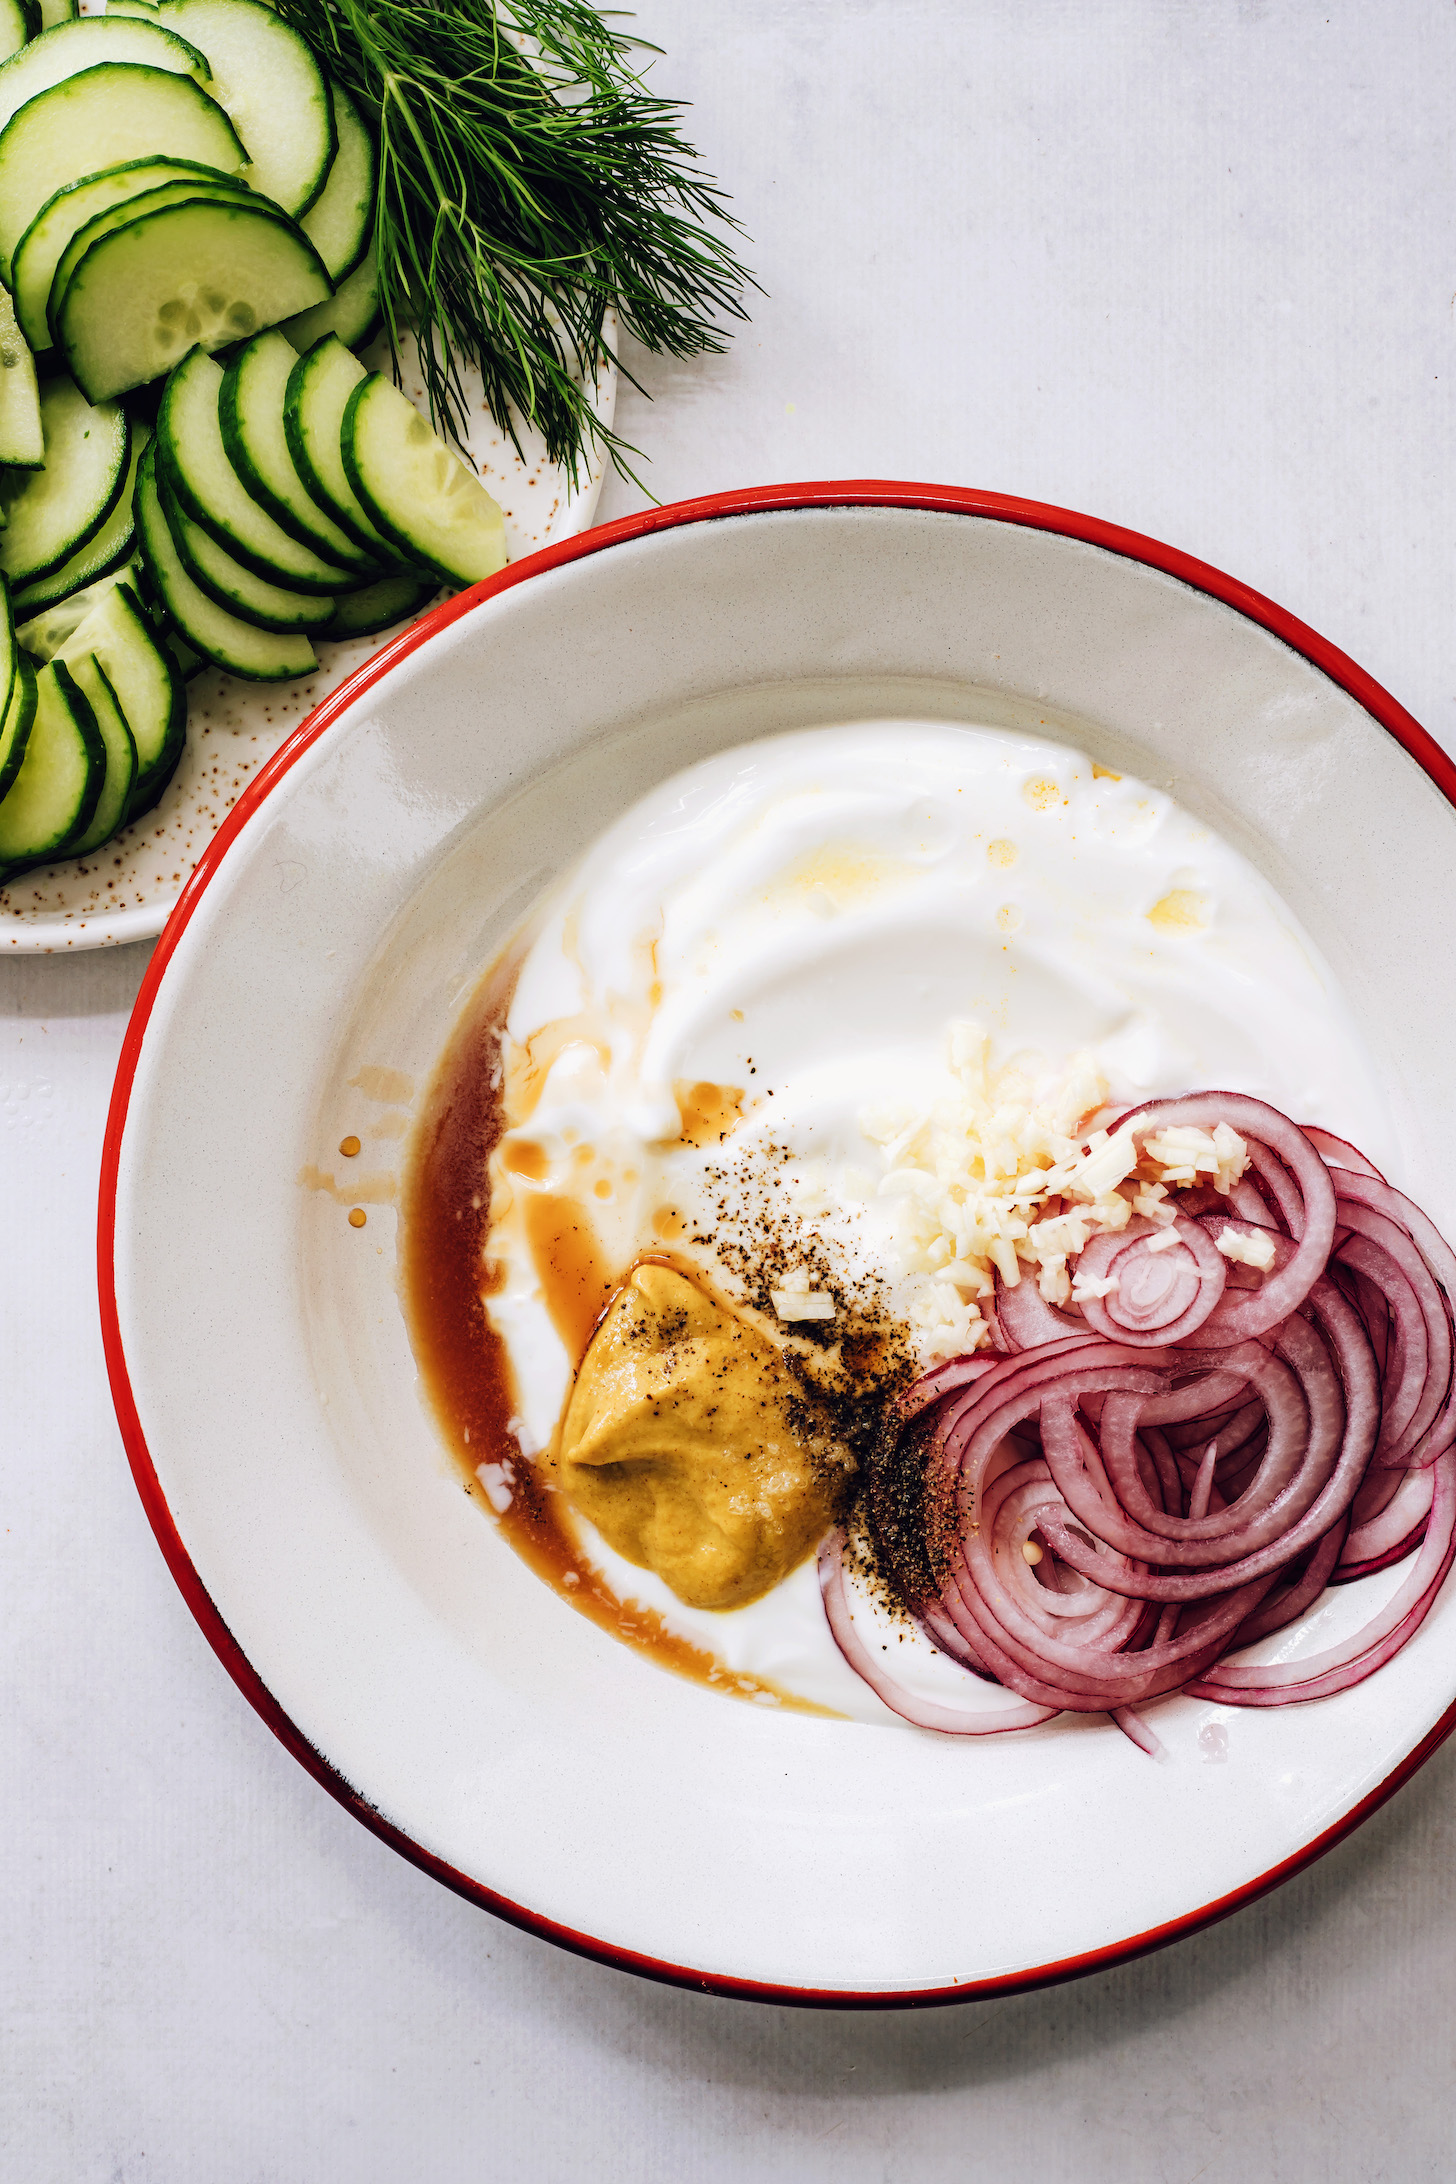 Sliced cucumber and dill beside a bowl of creamy coconut yogurt dressing